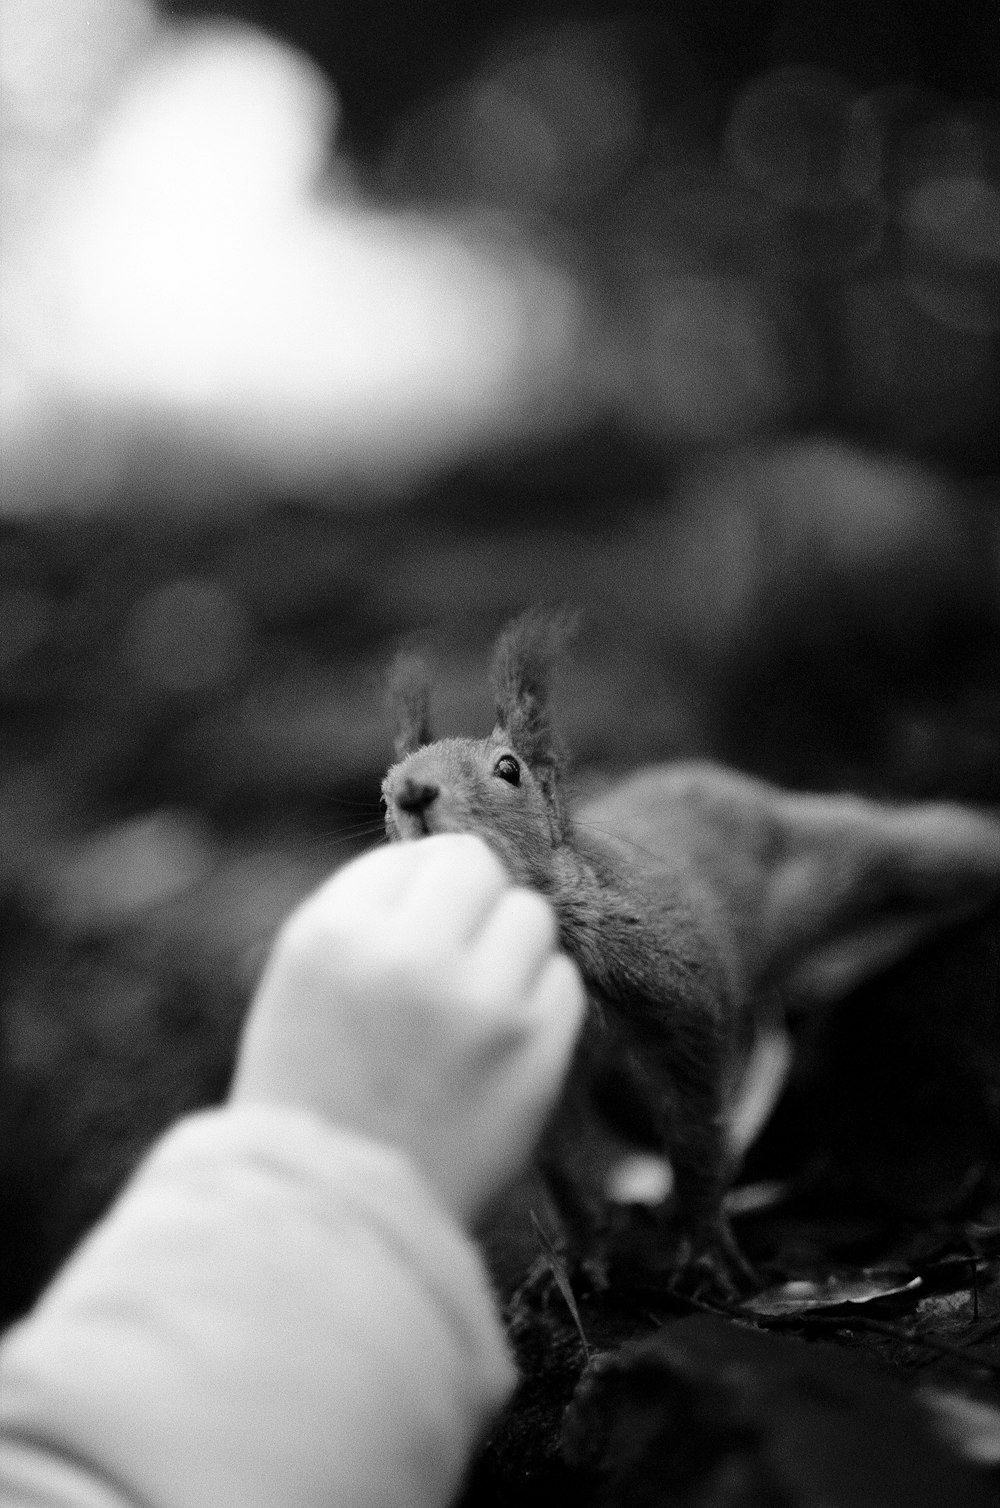 a baby reaching for a squirrel toy in a forest